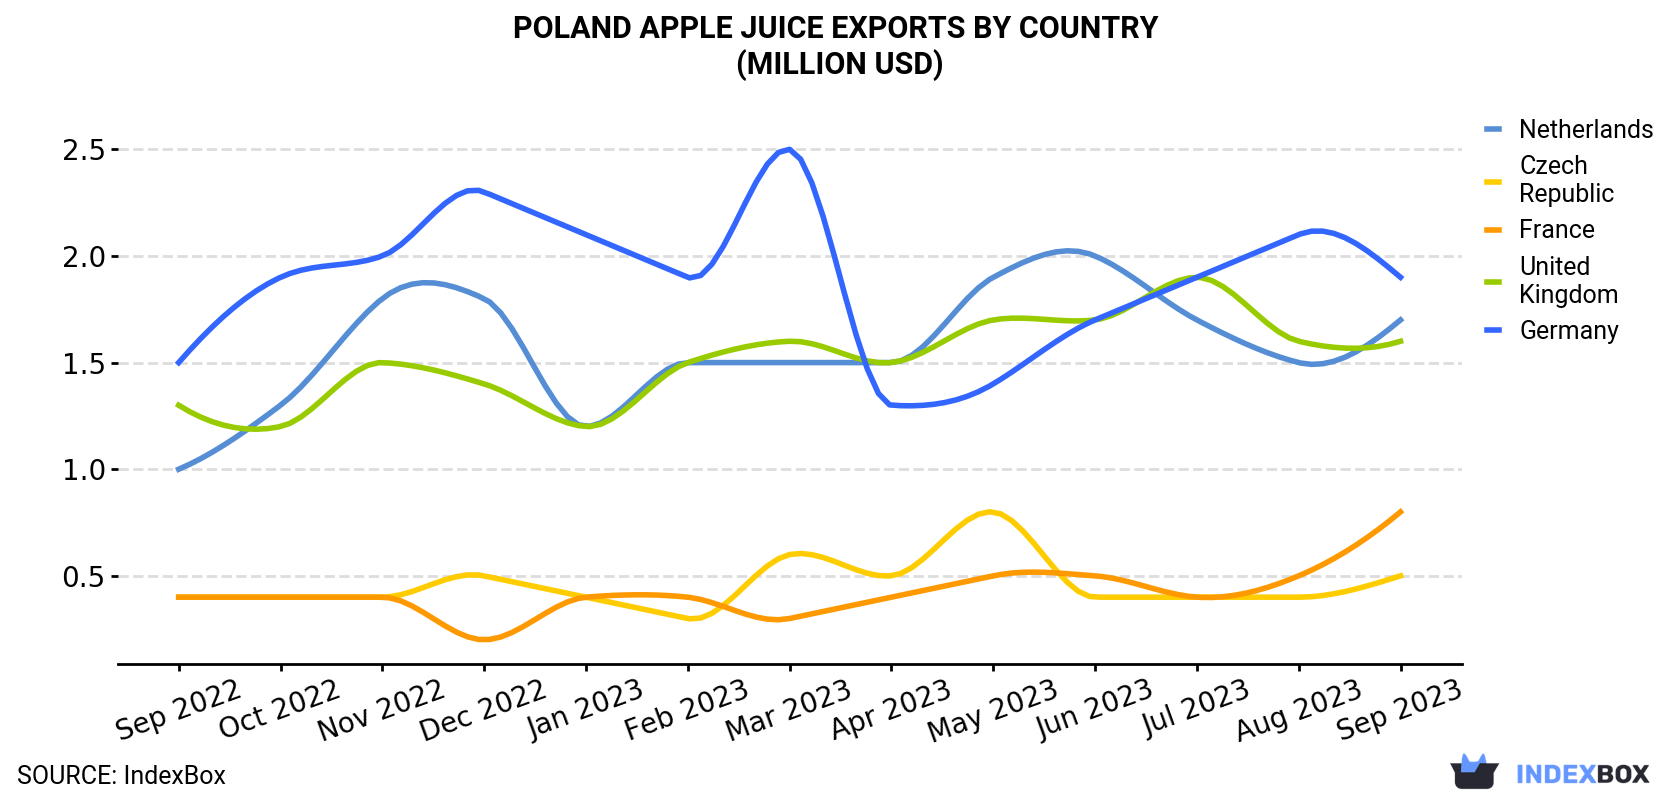 Poland Apple Juice Exports By Country (Million USD)